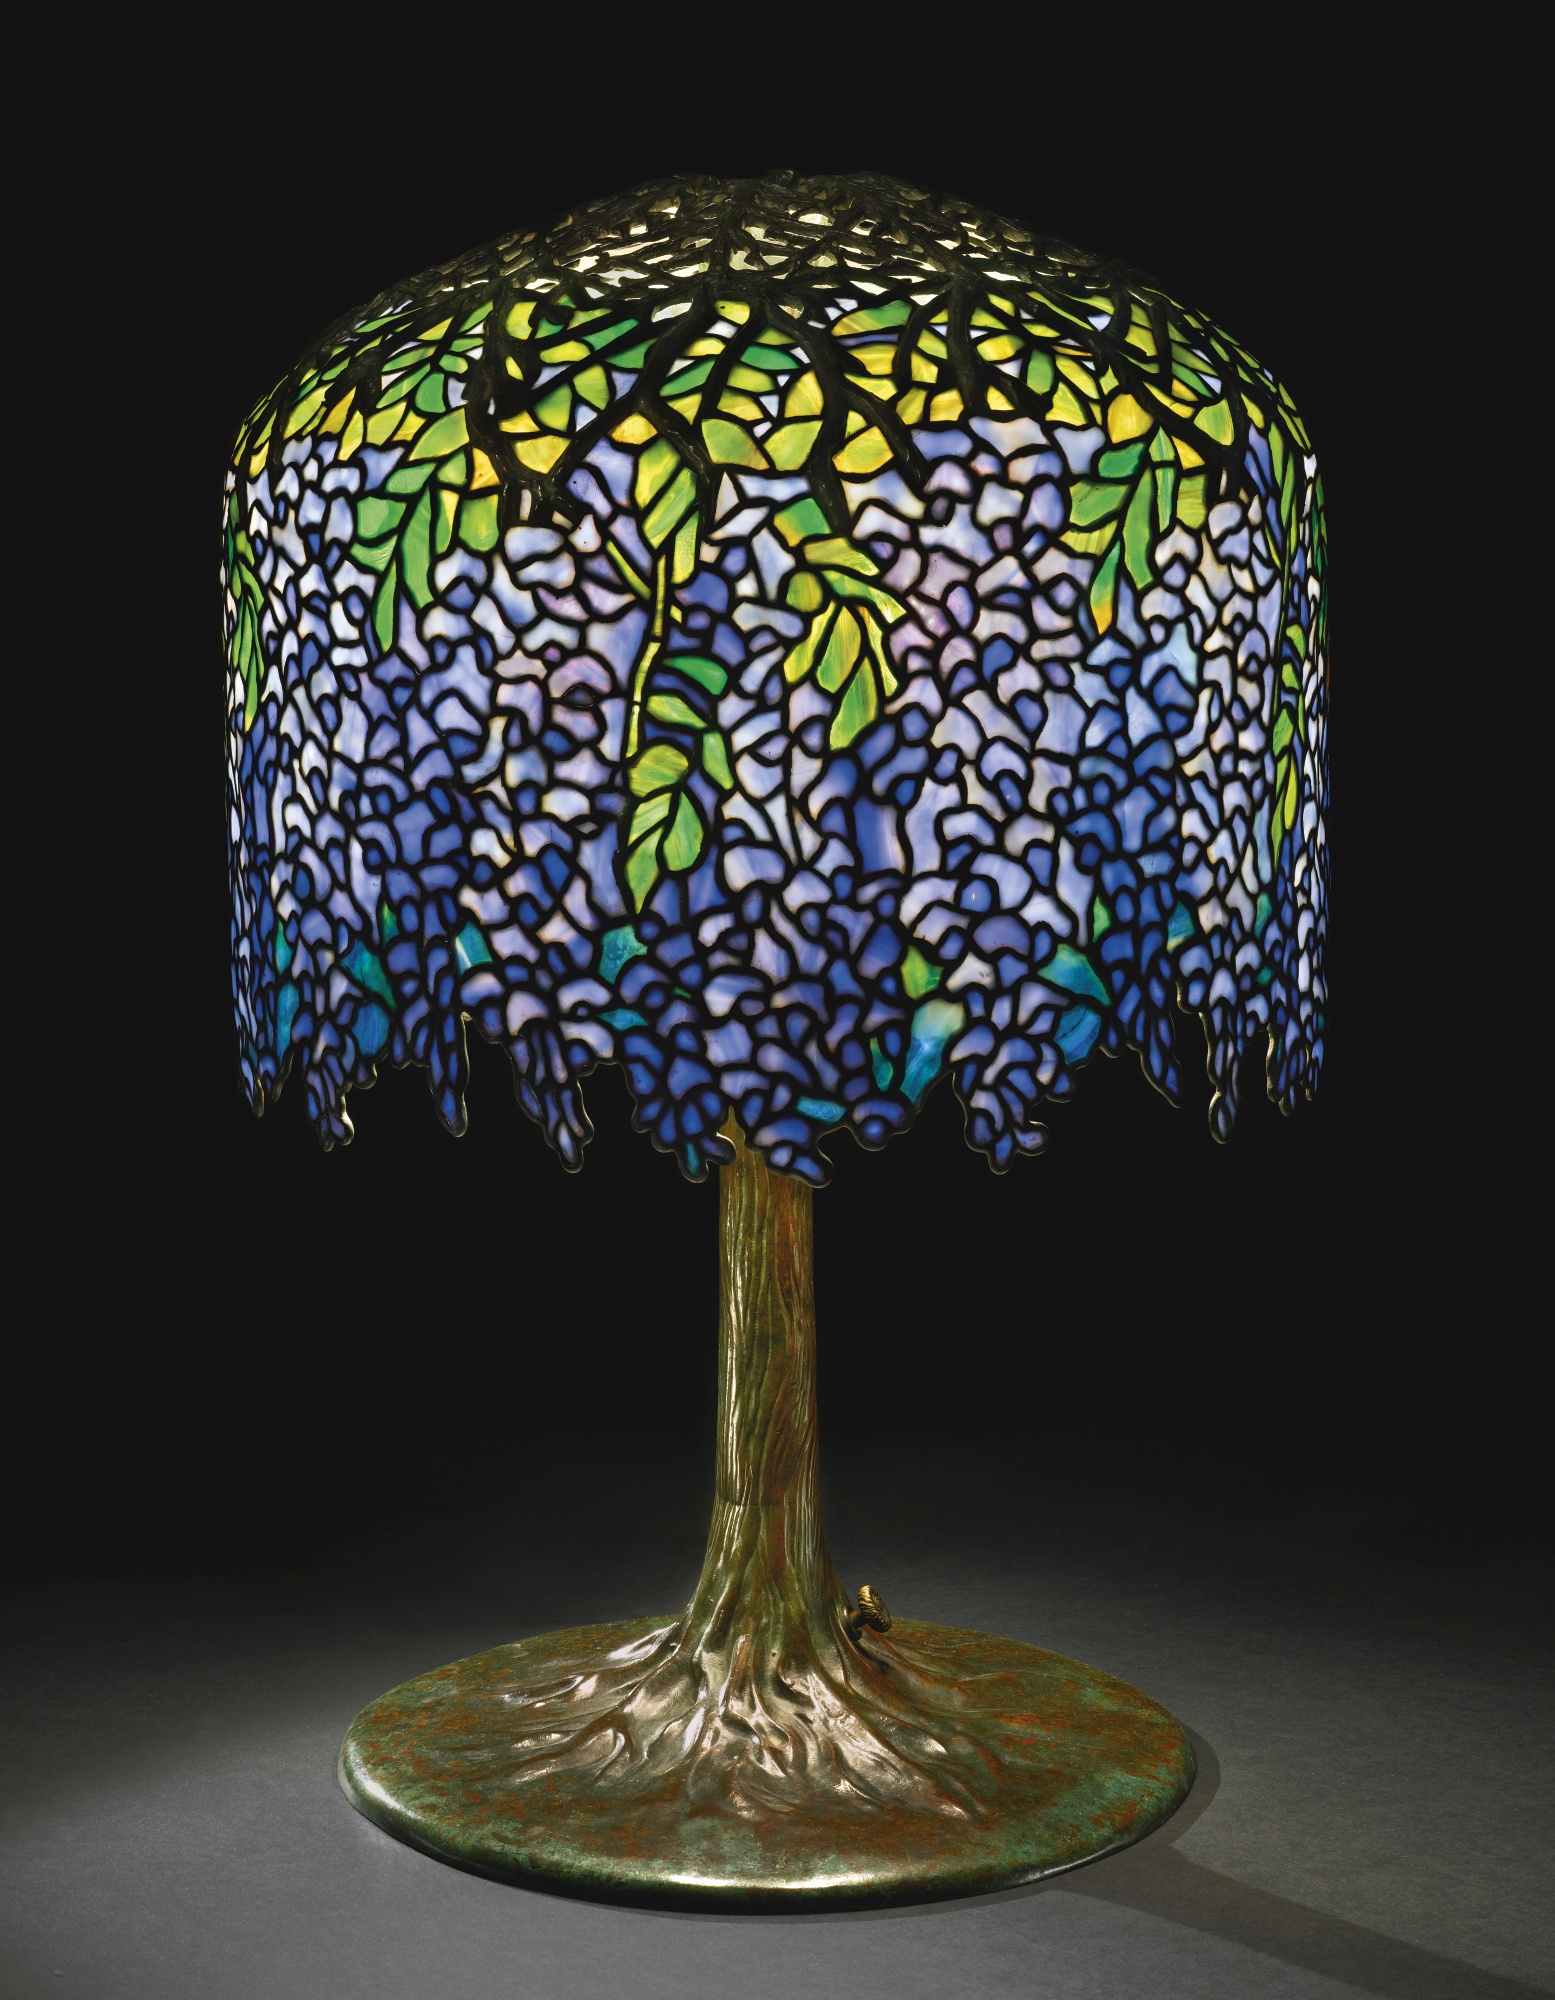 One of the most expensive lamps is the TIFFANY WISTERIA LAMP